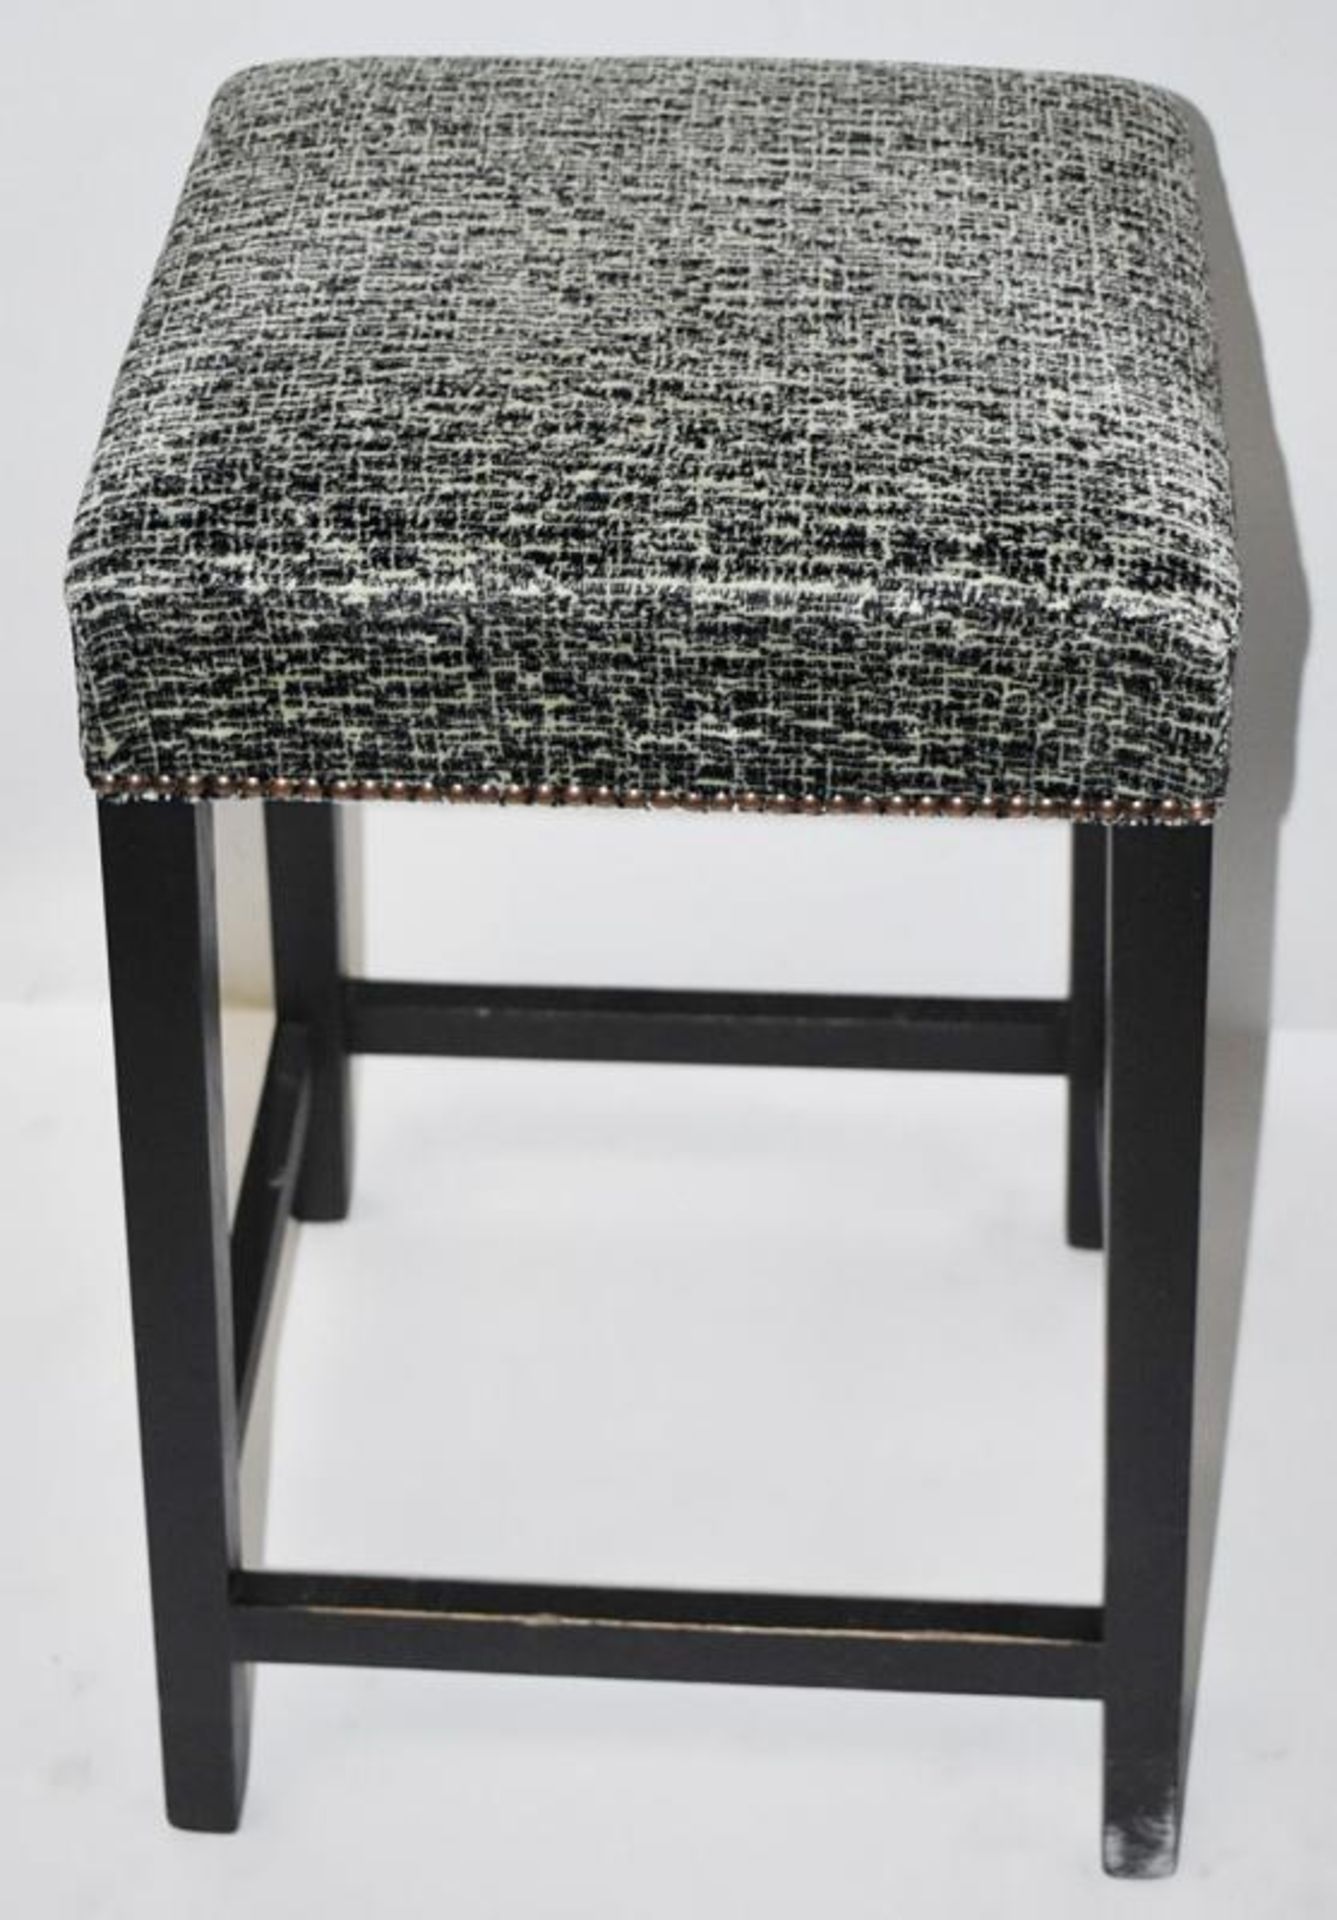 1 x Contemporary Bar Stool Upholstered In A Chic Designer Chenille Fabric - Recently Removed From A - Image 4 of 6